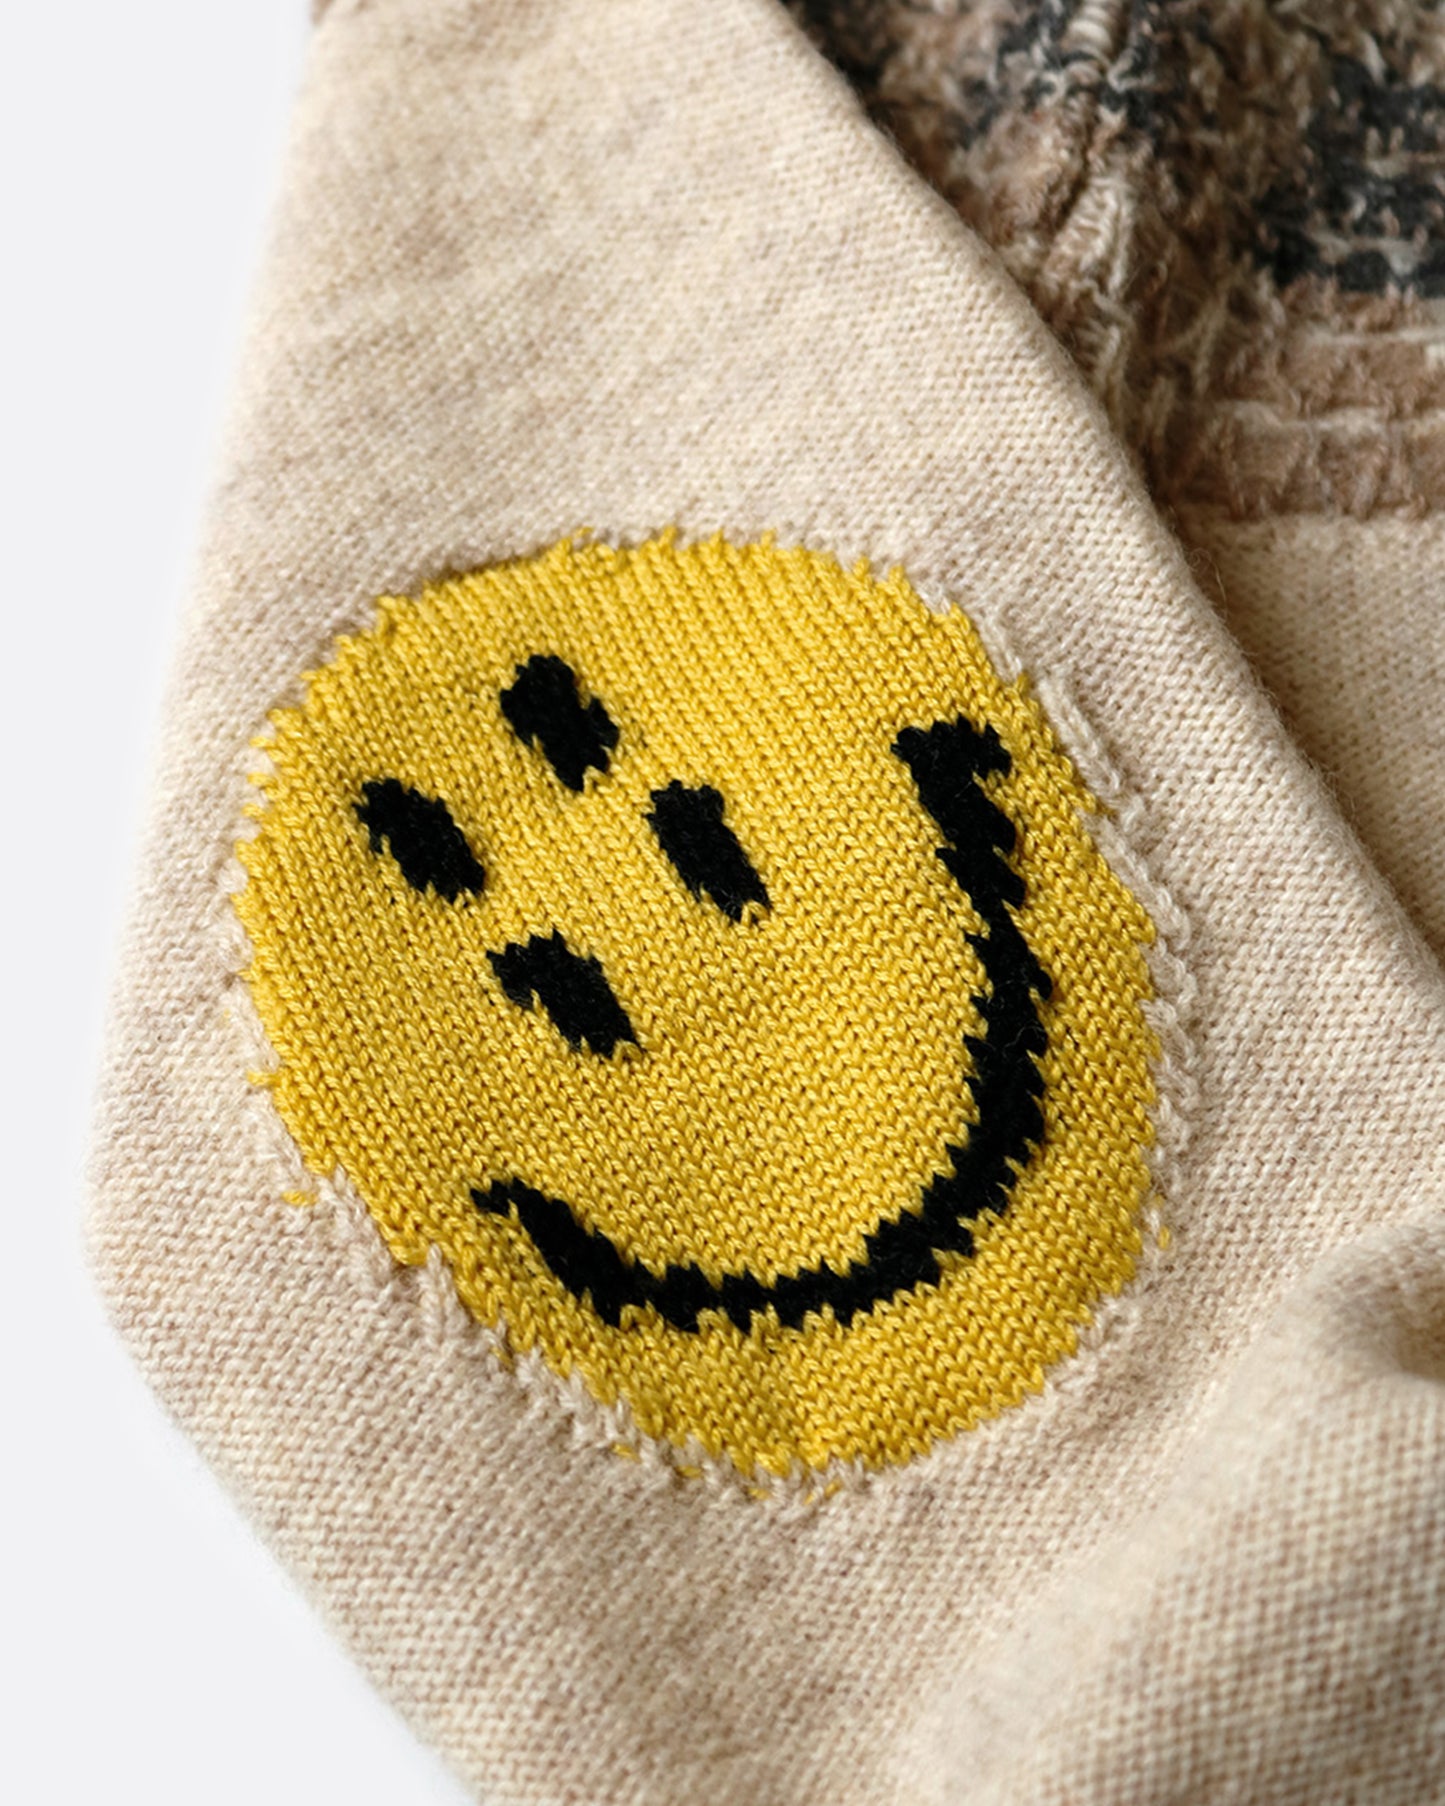 A close up of the smiley patch on the elbow.